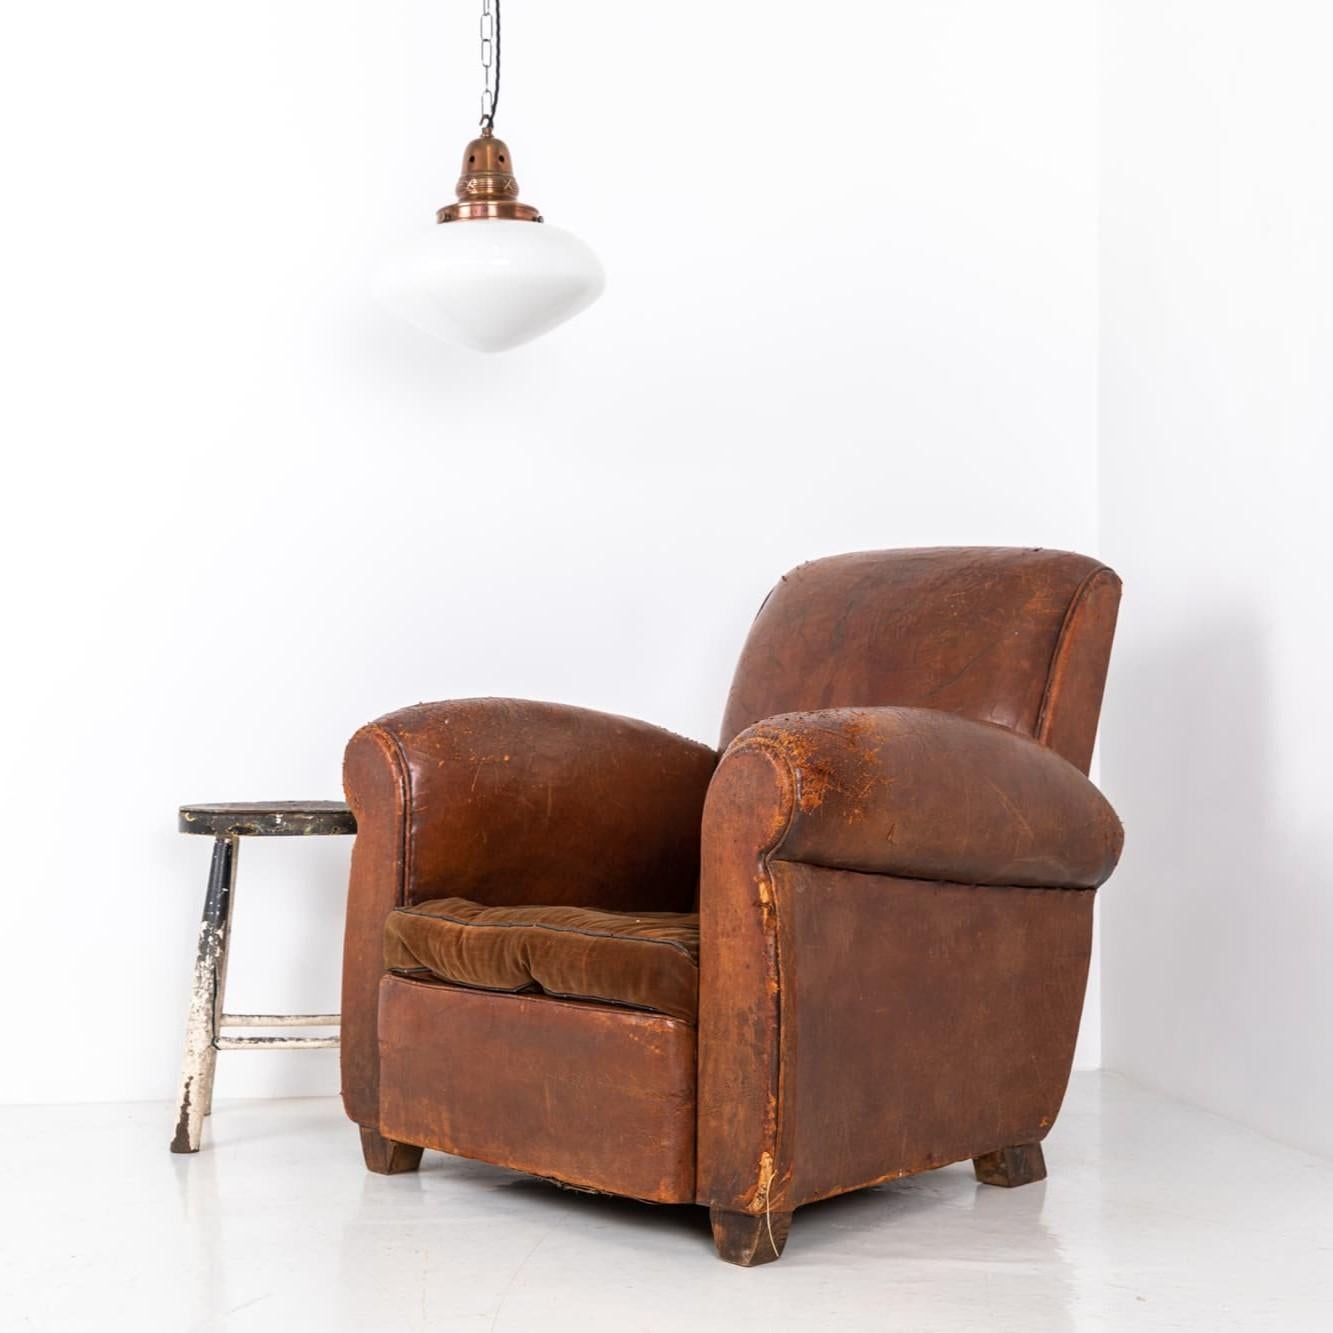 Hand-Crafted Antique Leather Art Deco Club Chair Country House Armchair, circa 1930 For Sale